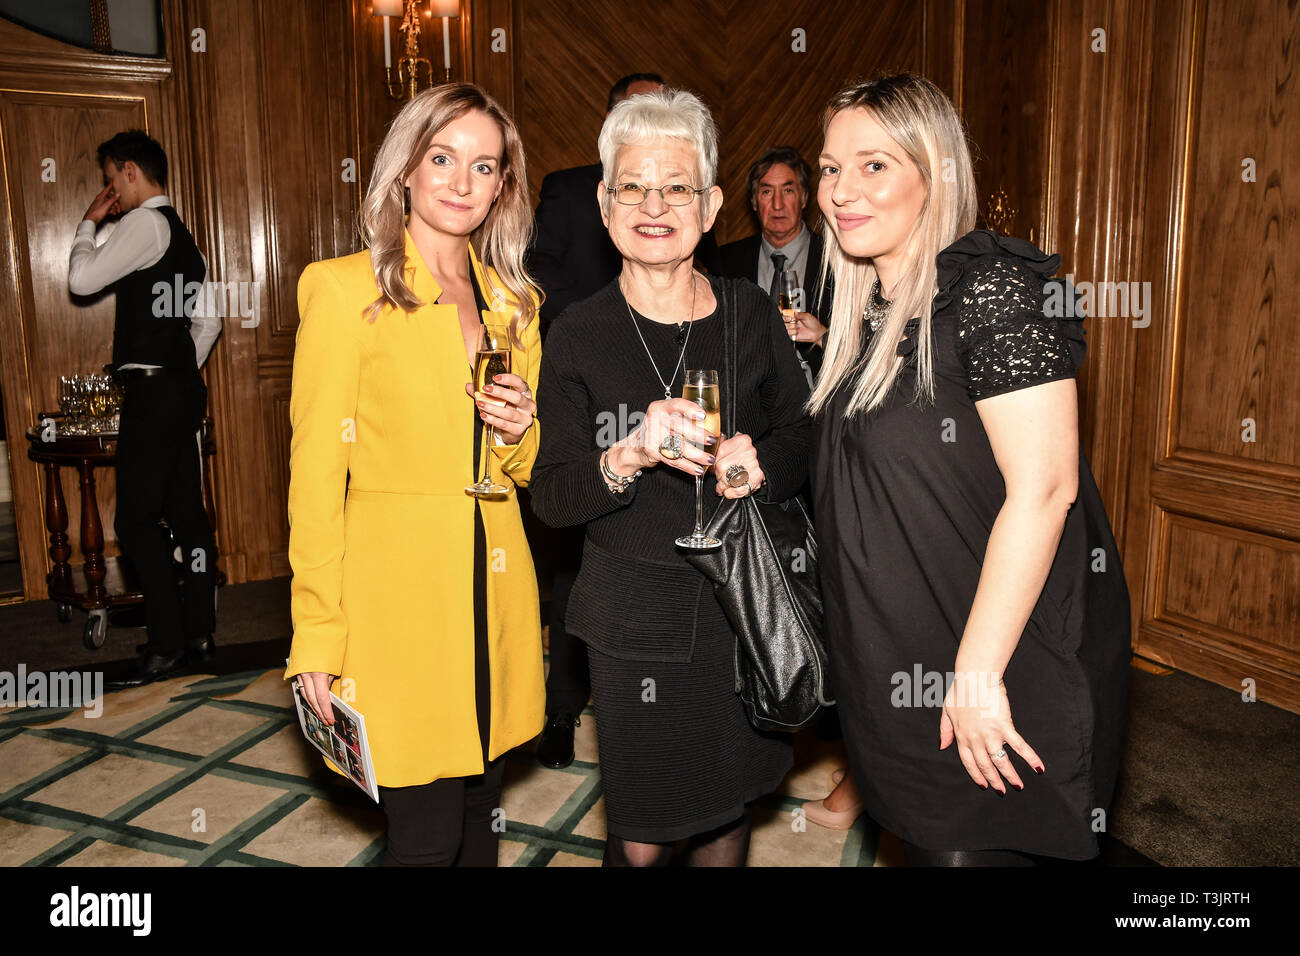 London, UK. 10th Apr, 2019. Retirement housing company hosts 7th annual Churchill Awards honour achievements of the Over 65's at Claridge's Hotel on 10 March 2019, London, UK. Credit: Picture Capital/Alamy Live News Stock Photo